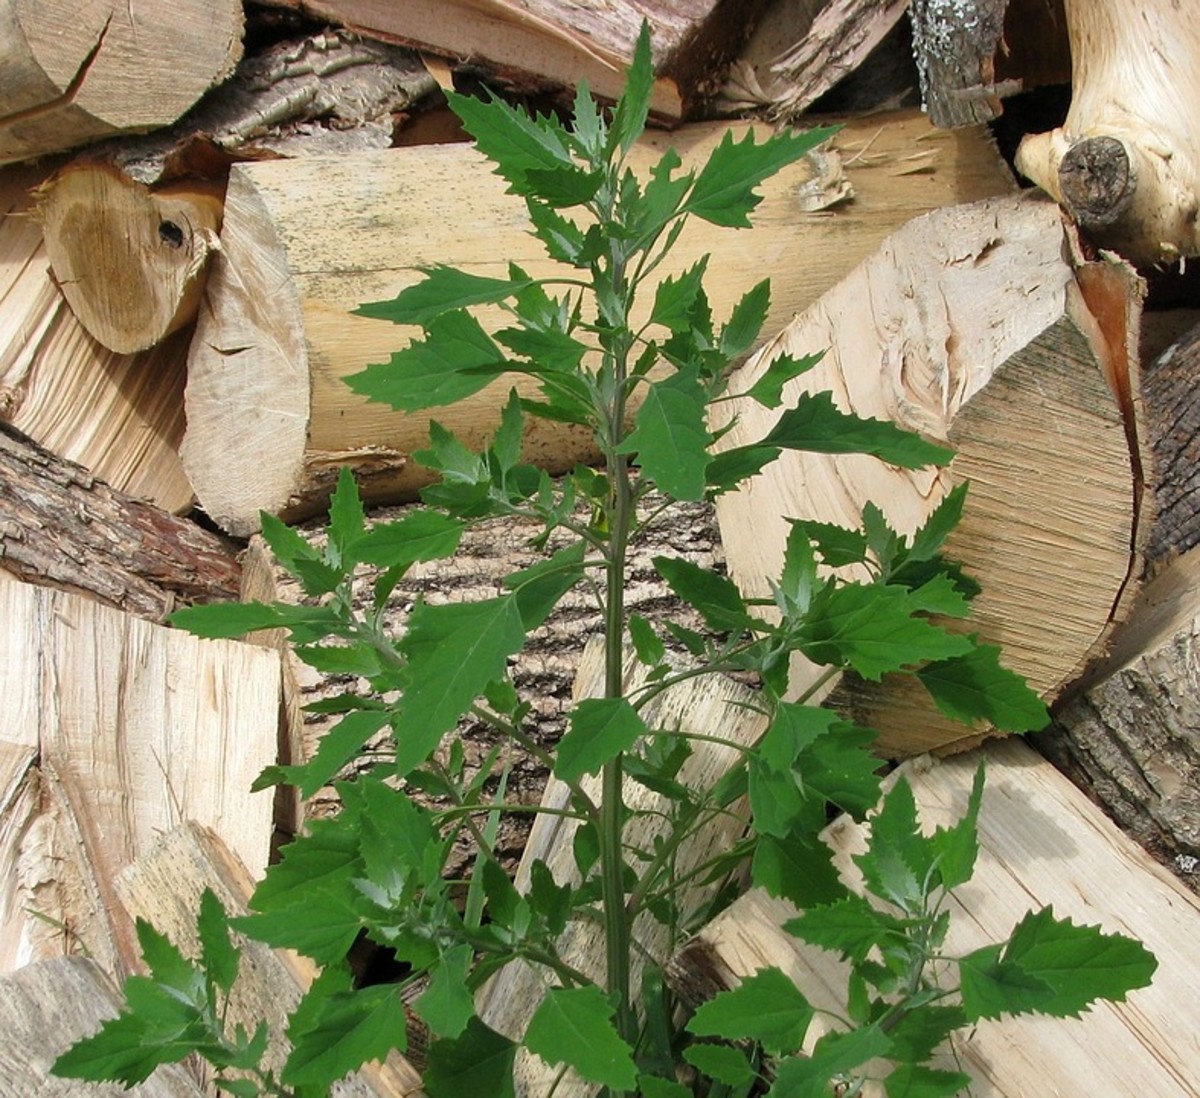 Can You Eat Lambs Quarters?